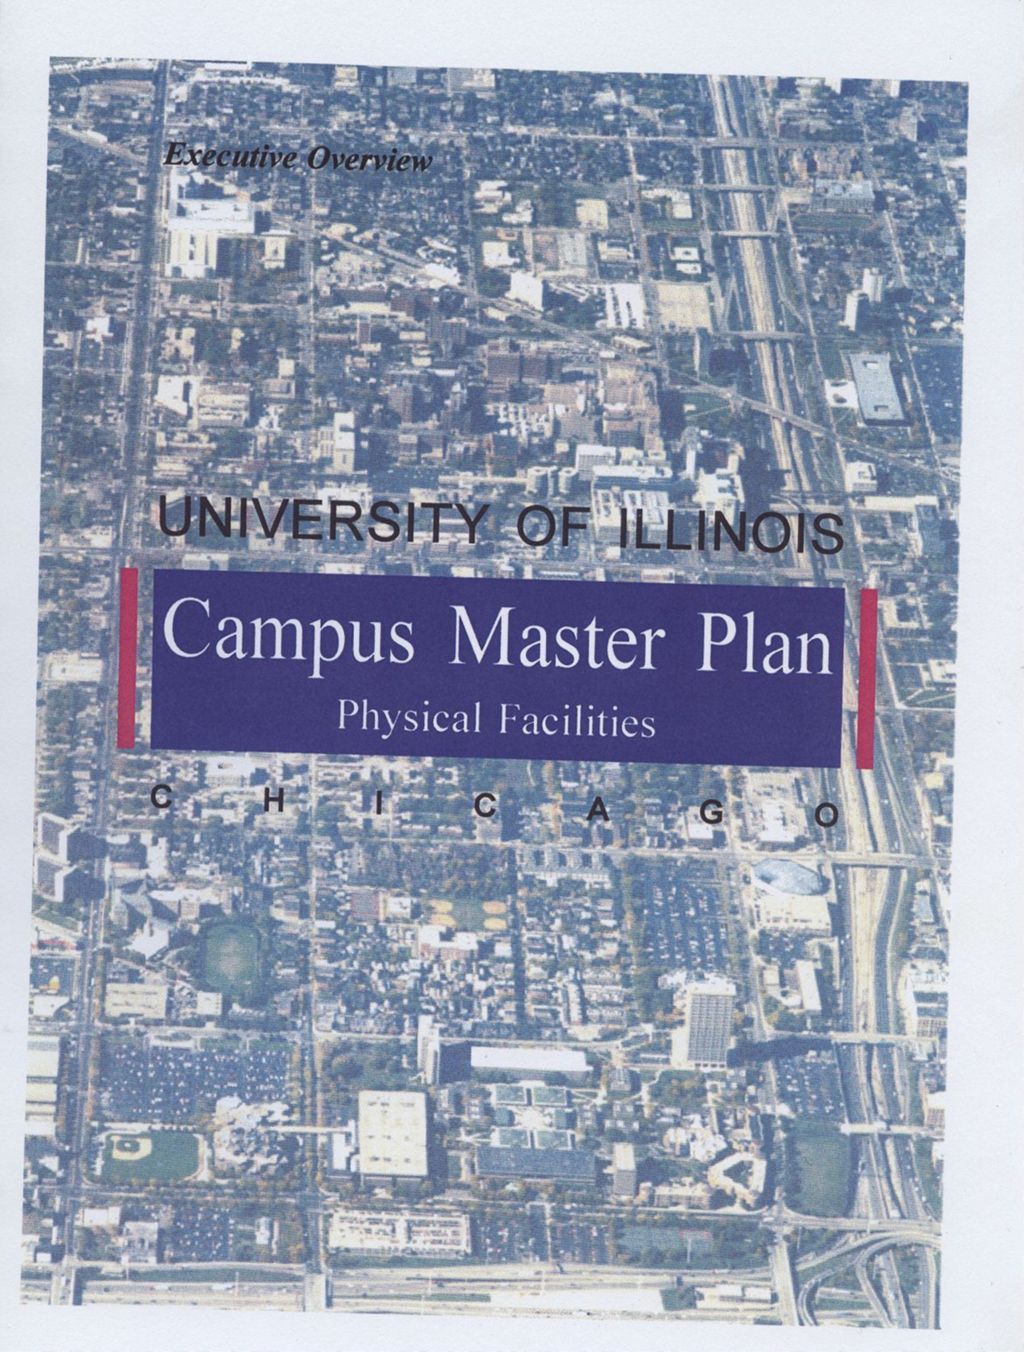 Miniature of University of Illinois Chicago, Campus Master Plan, Physical Facilities. Executive Overview